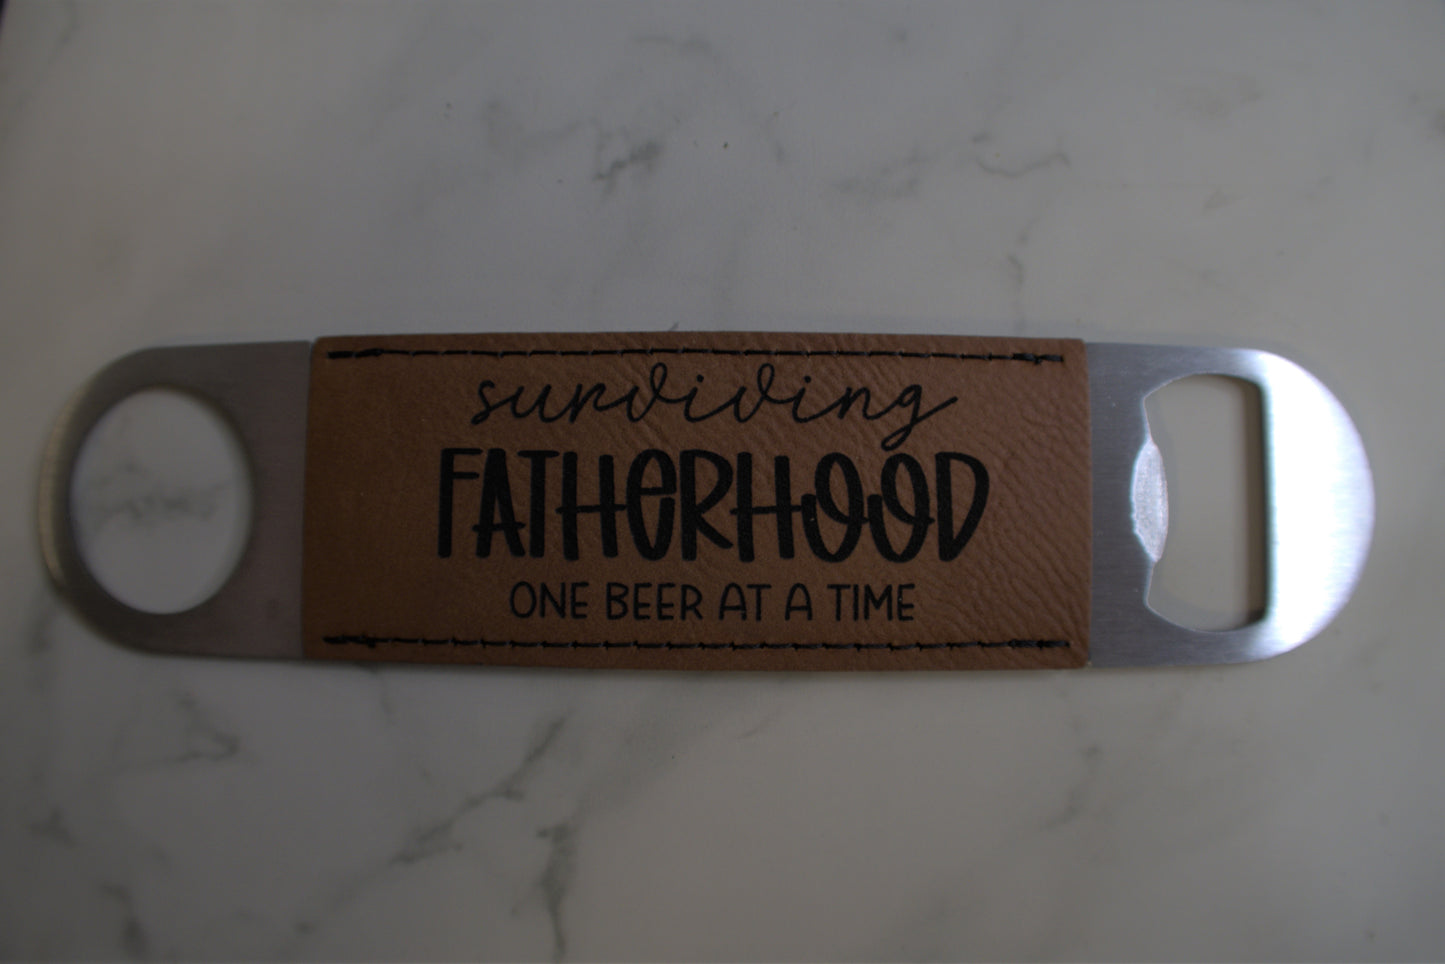 Surviving Fatherhood One Beer at a Time